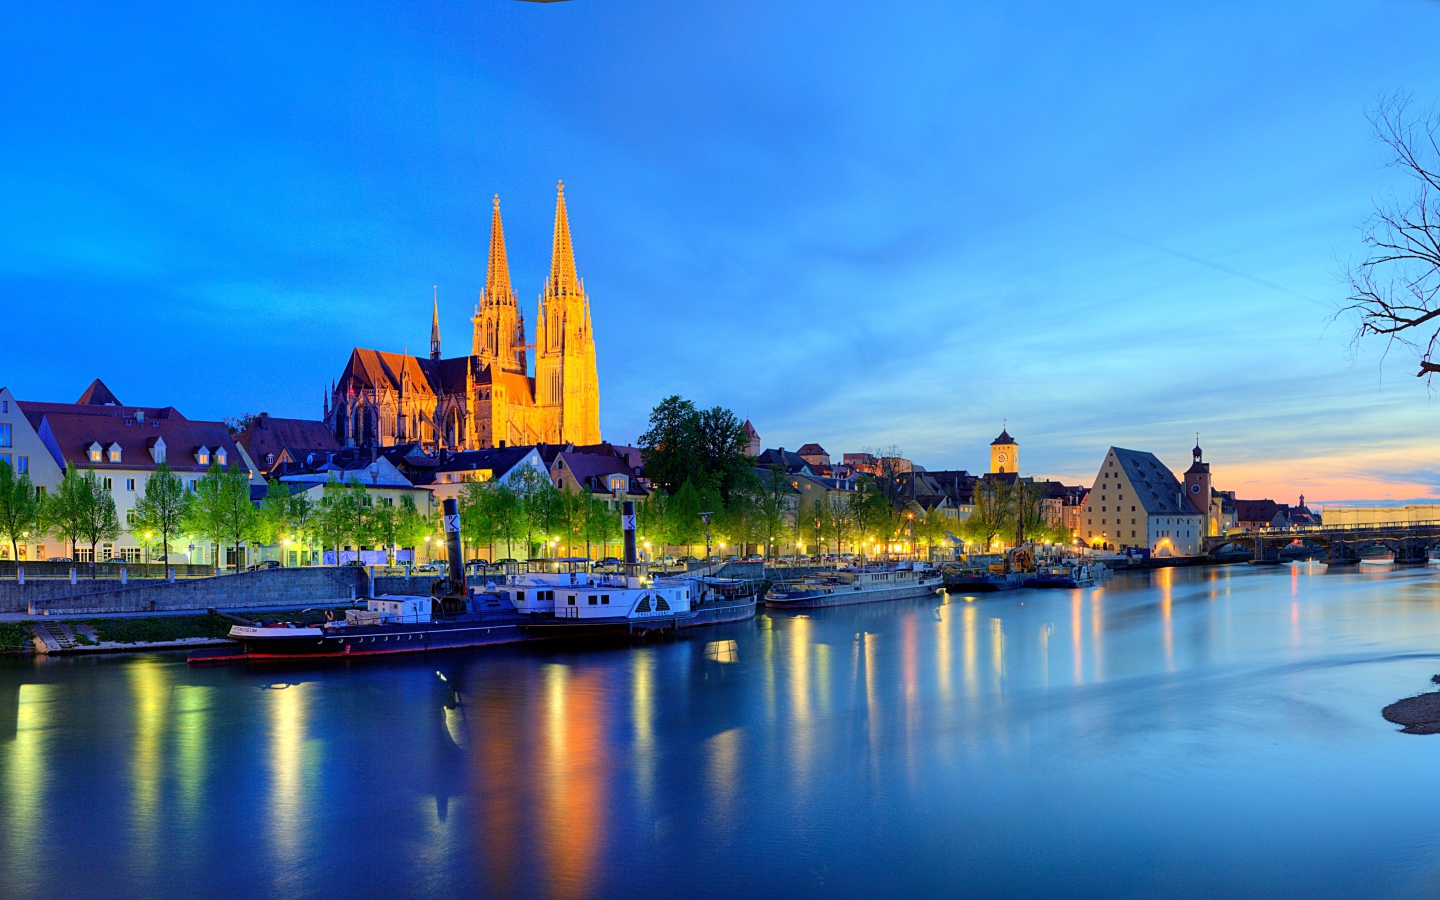 Night city Regensburg by the river, Germany